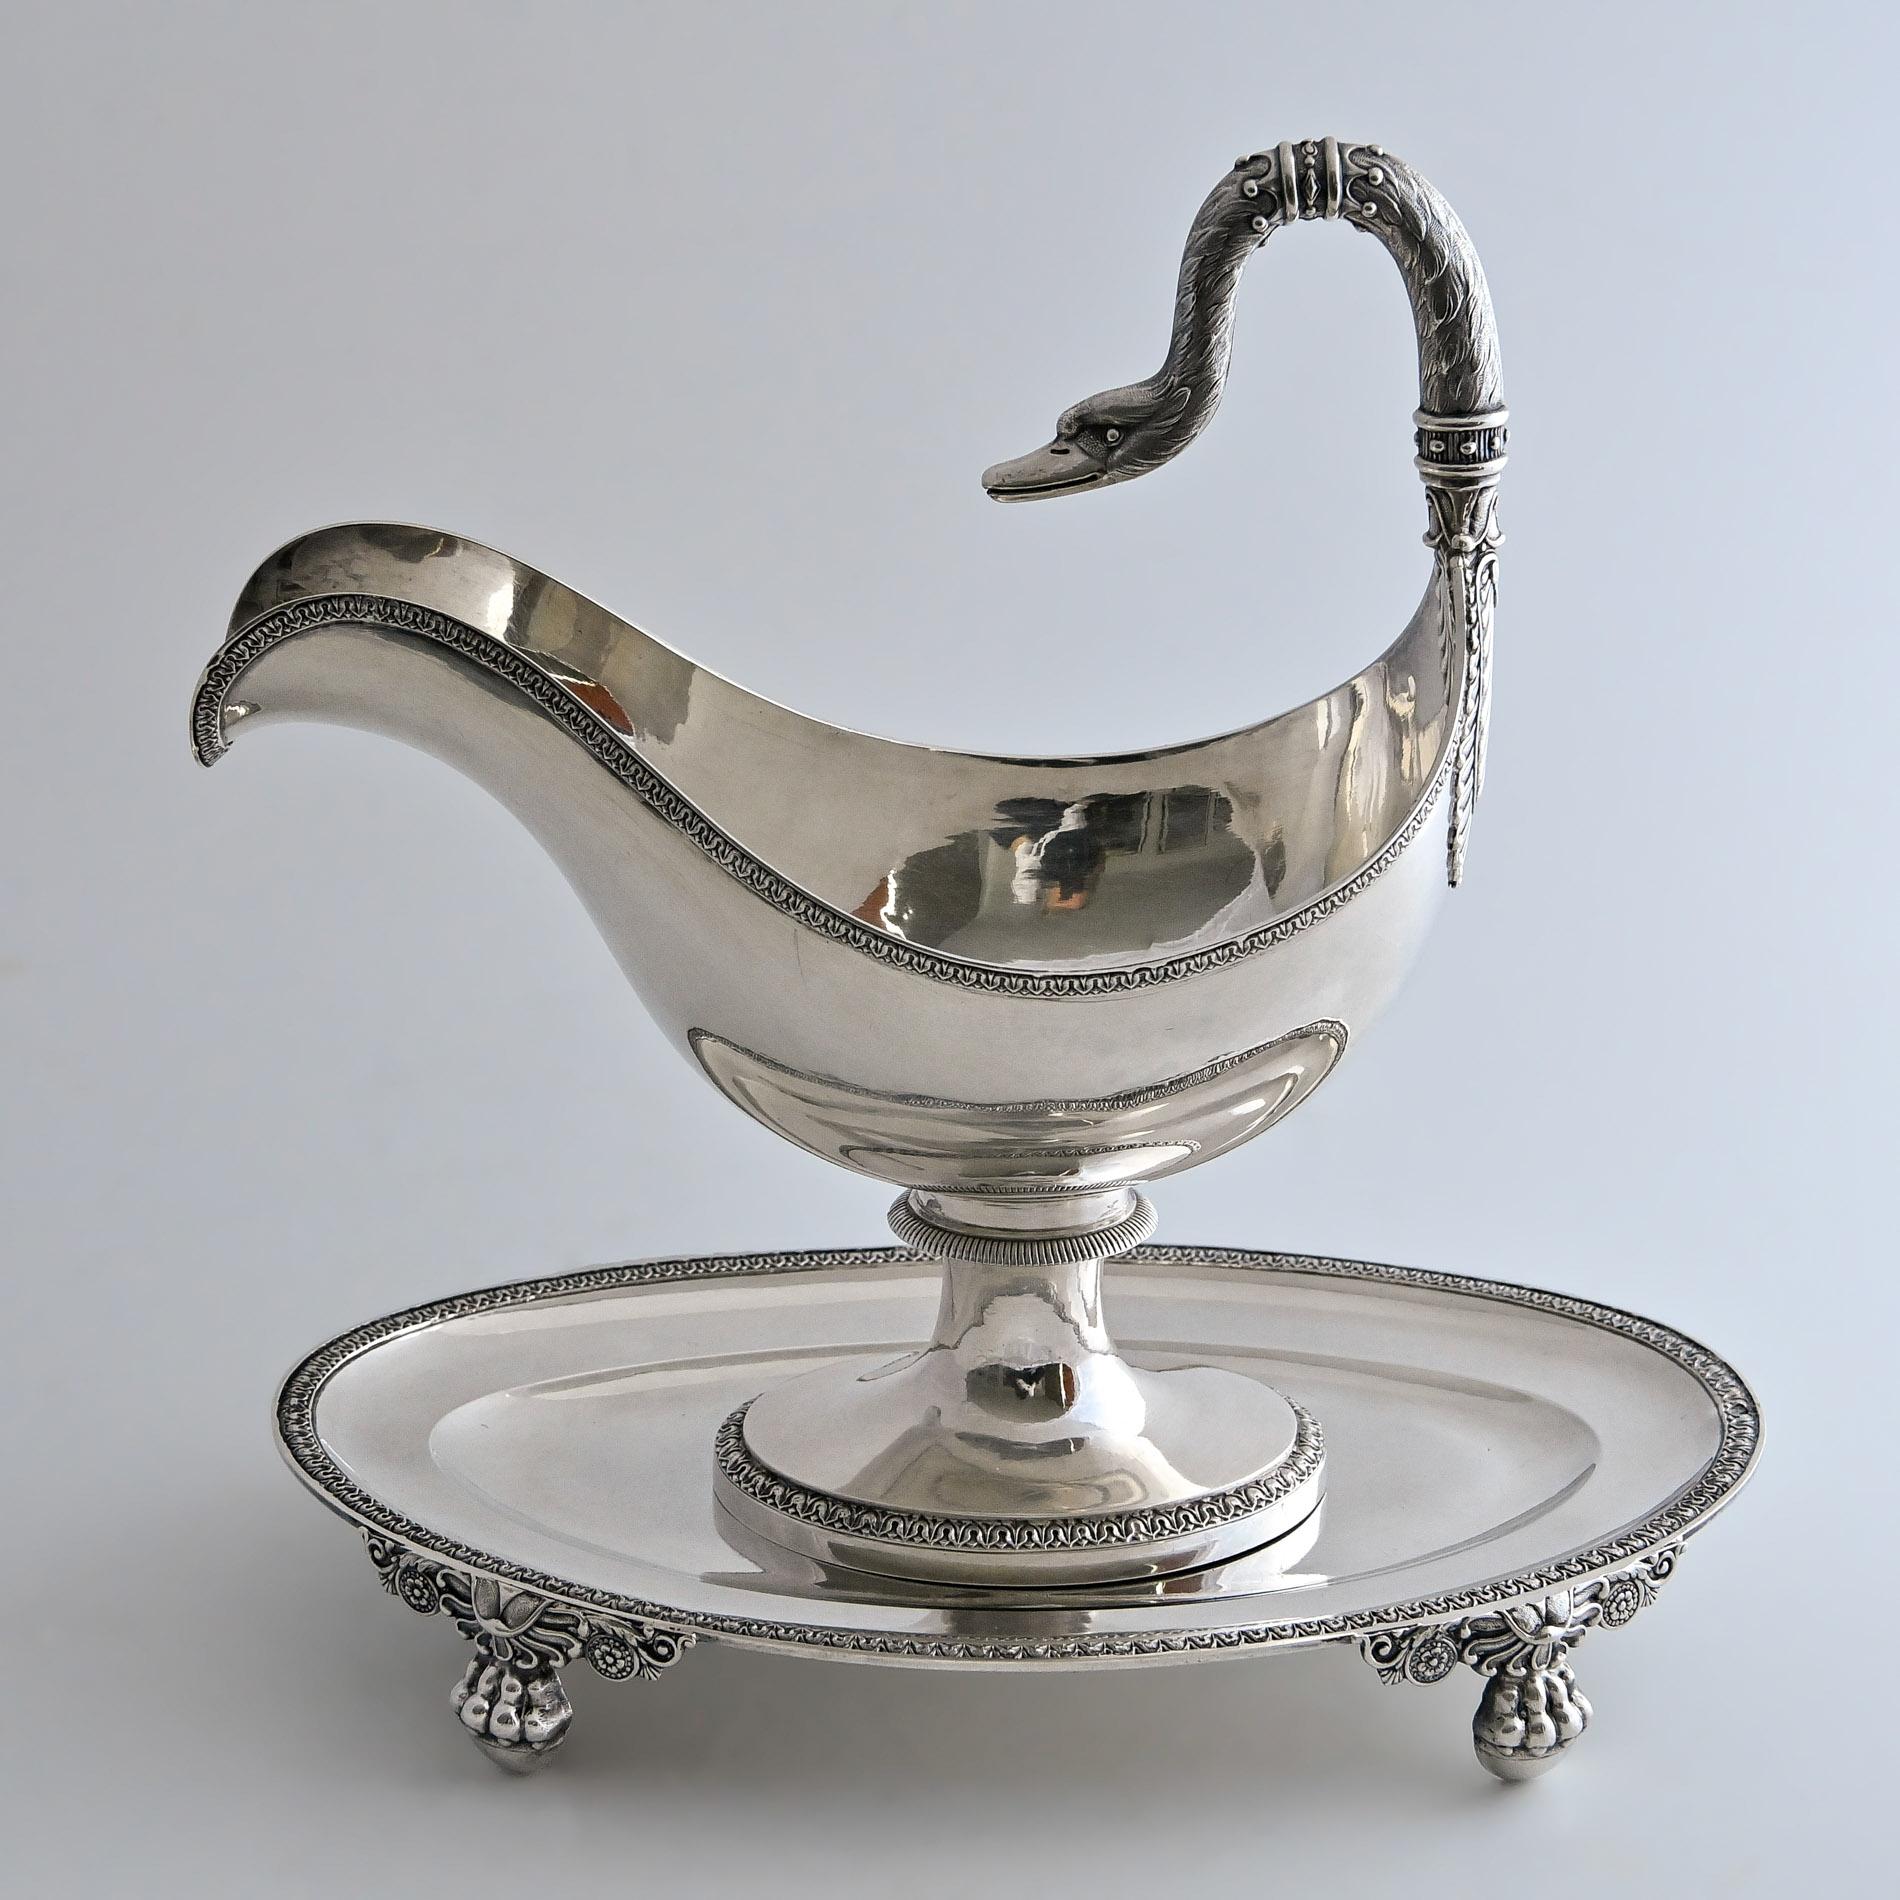 A rare and very unusual gravy boat with matching stand. It is marked Paris around 1819-1838 in solid silver 950.
Particularly fine silversmithing, the elaboration with the handle as a swan head very beautiful and also quite practical to it.